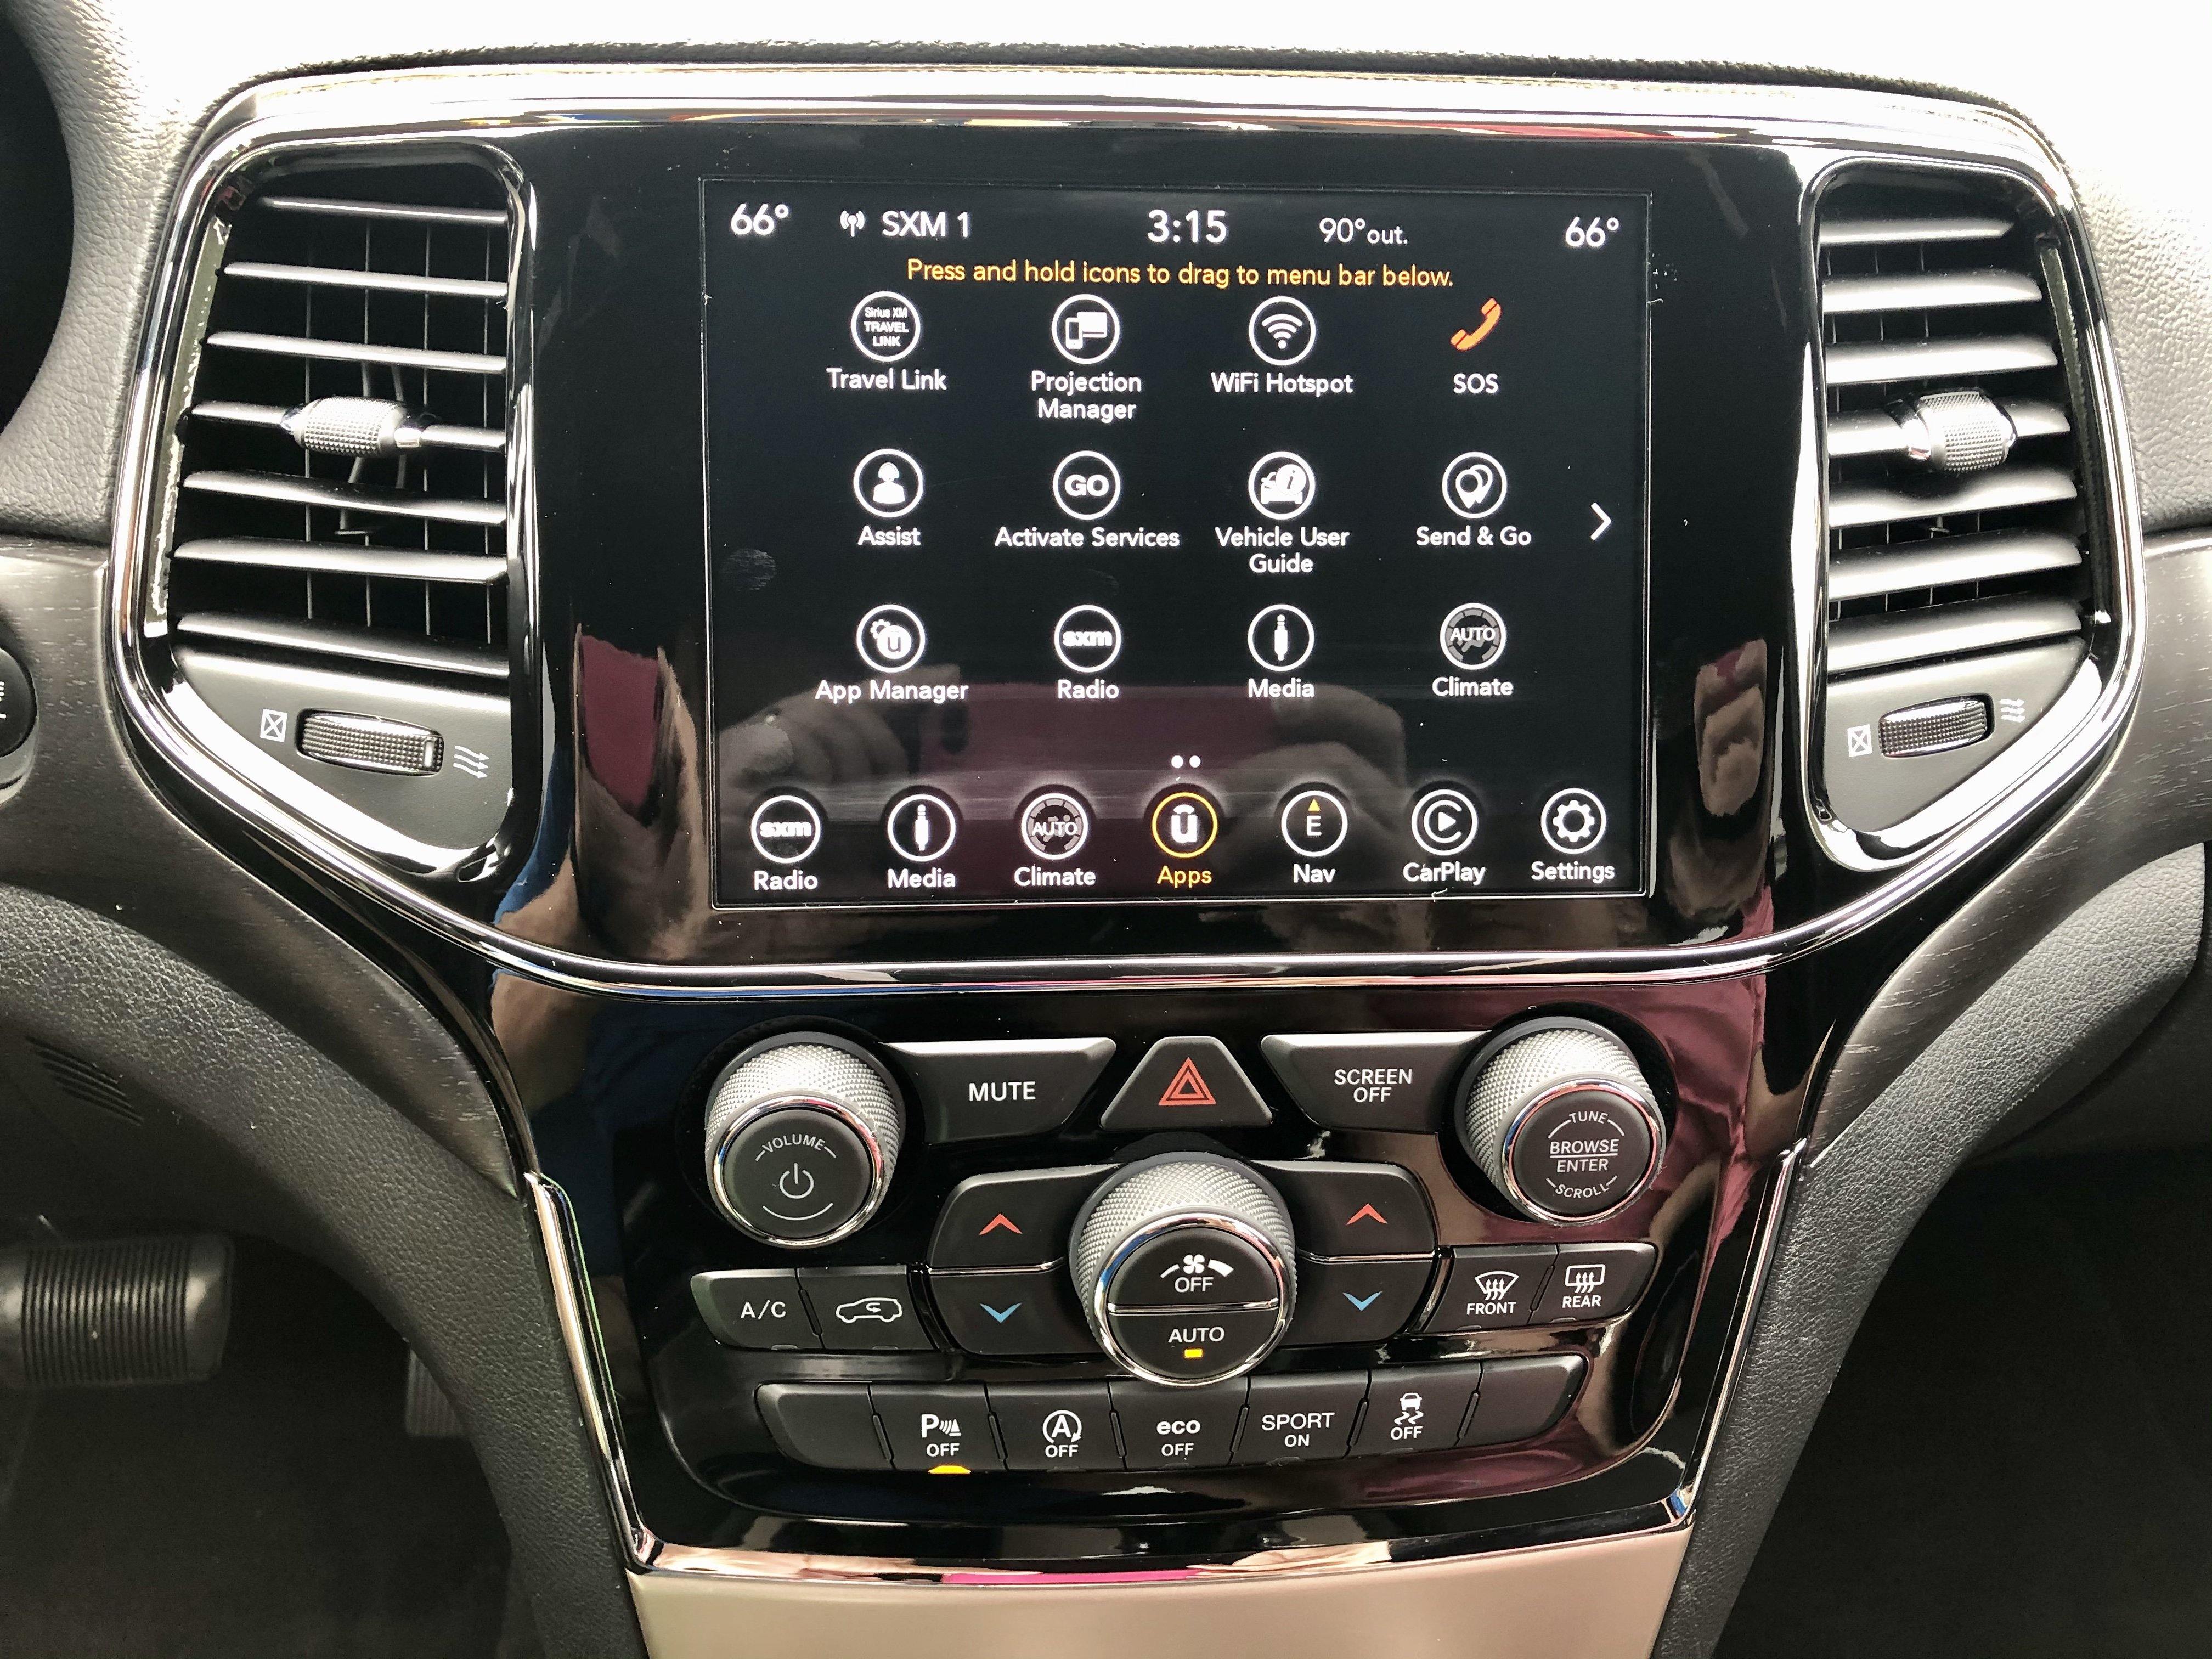 is 2018 jeep grand cherokee navigation system available